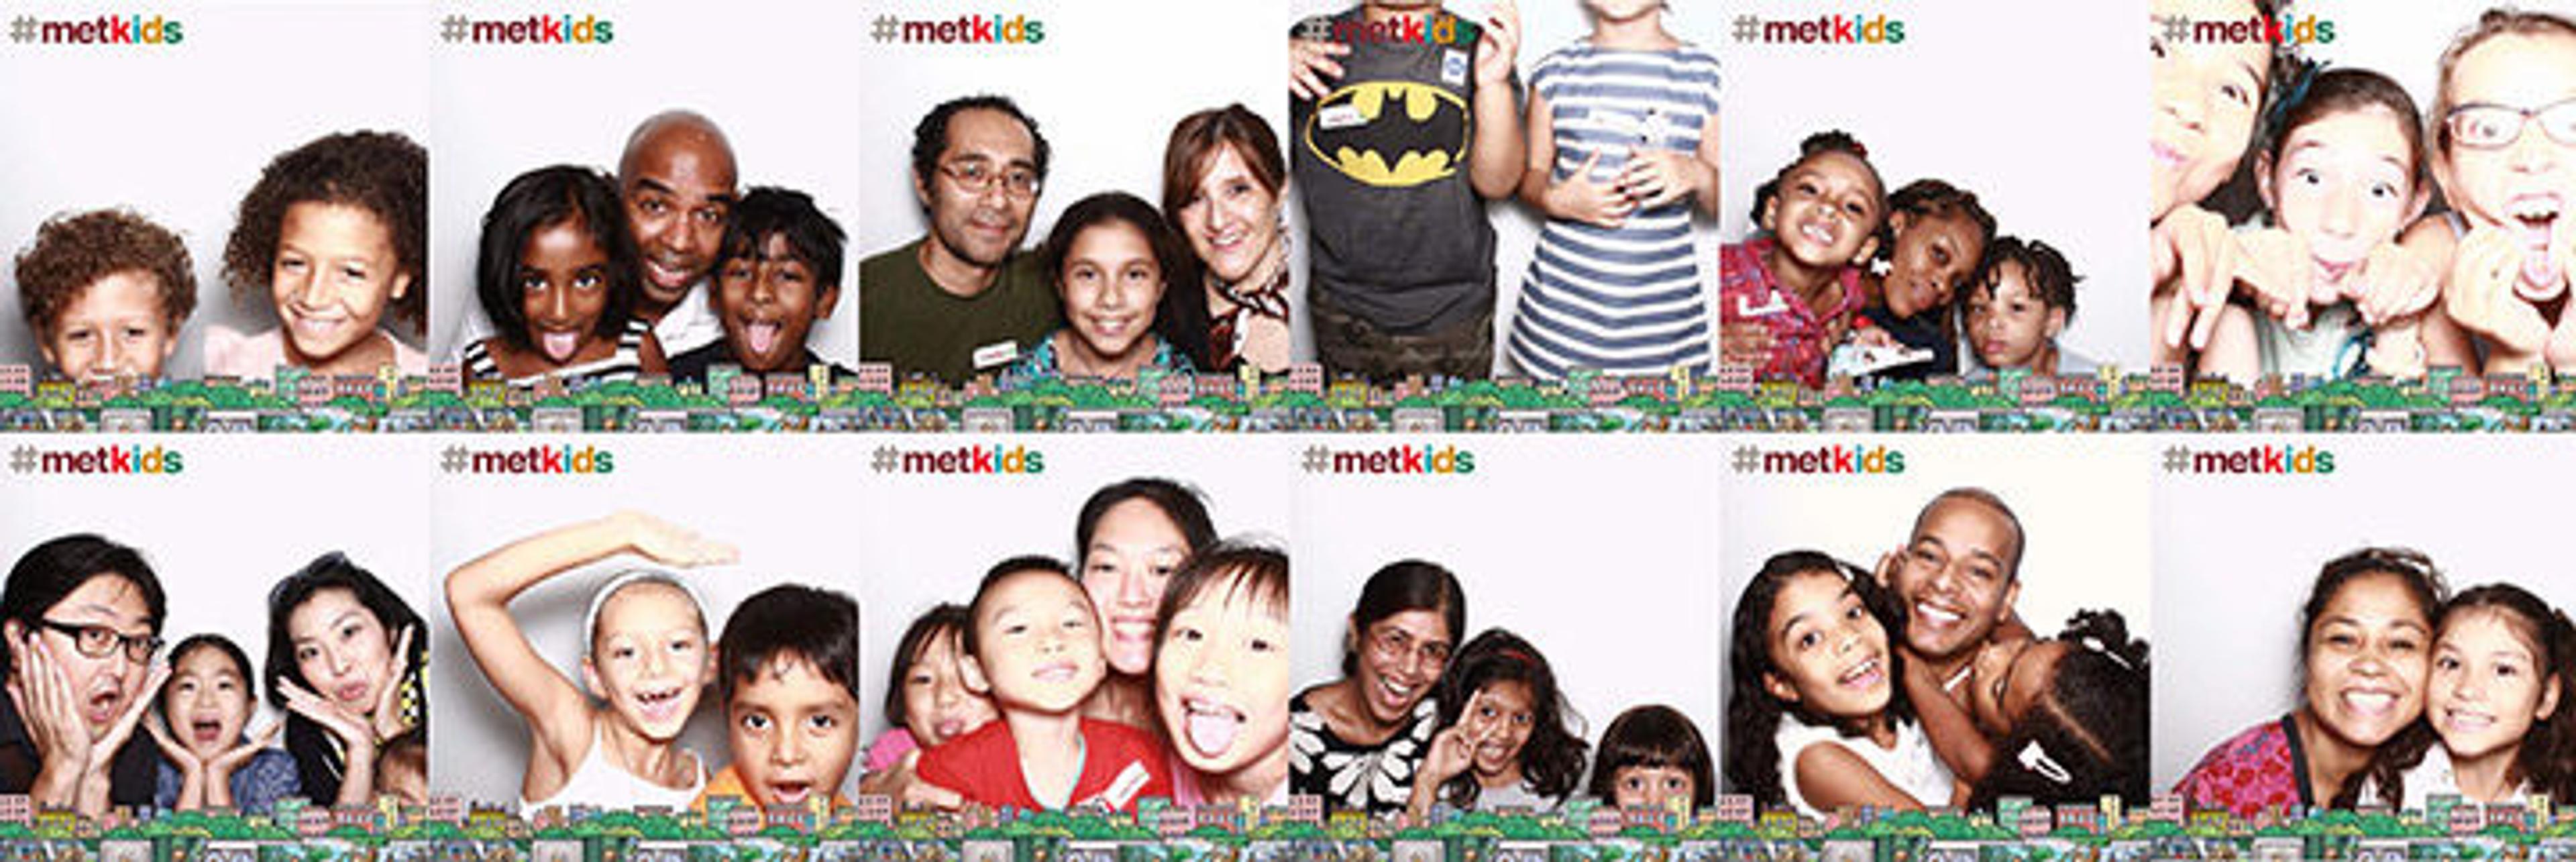 #MetKids photobooth pictures